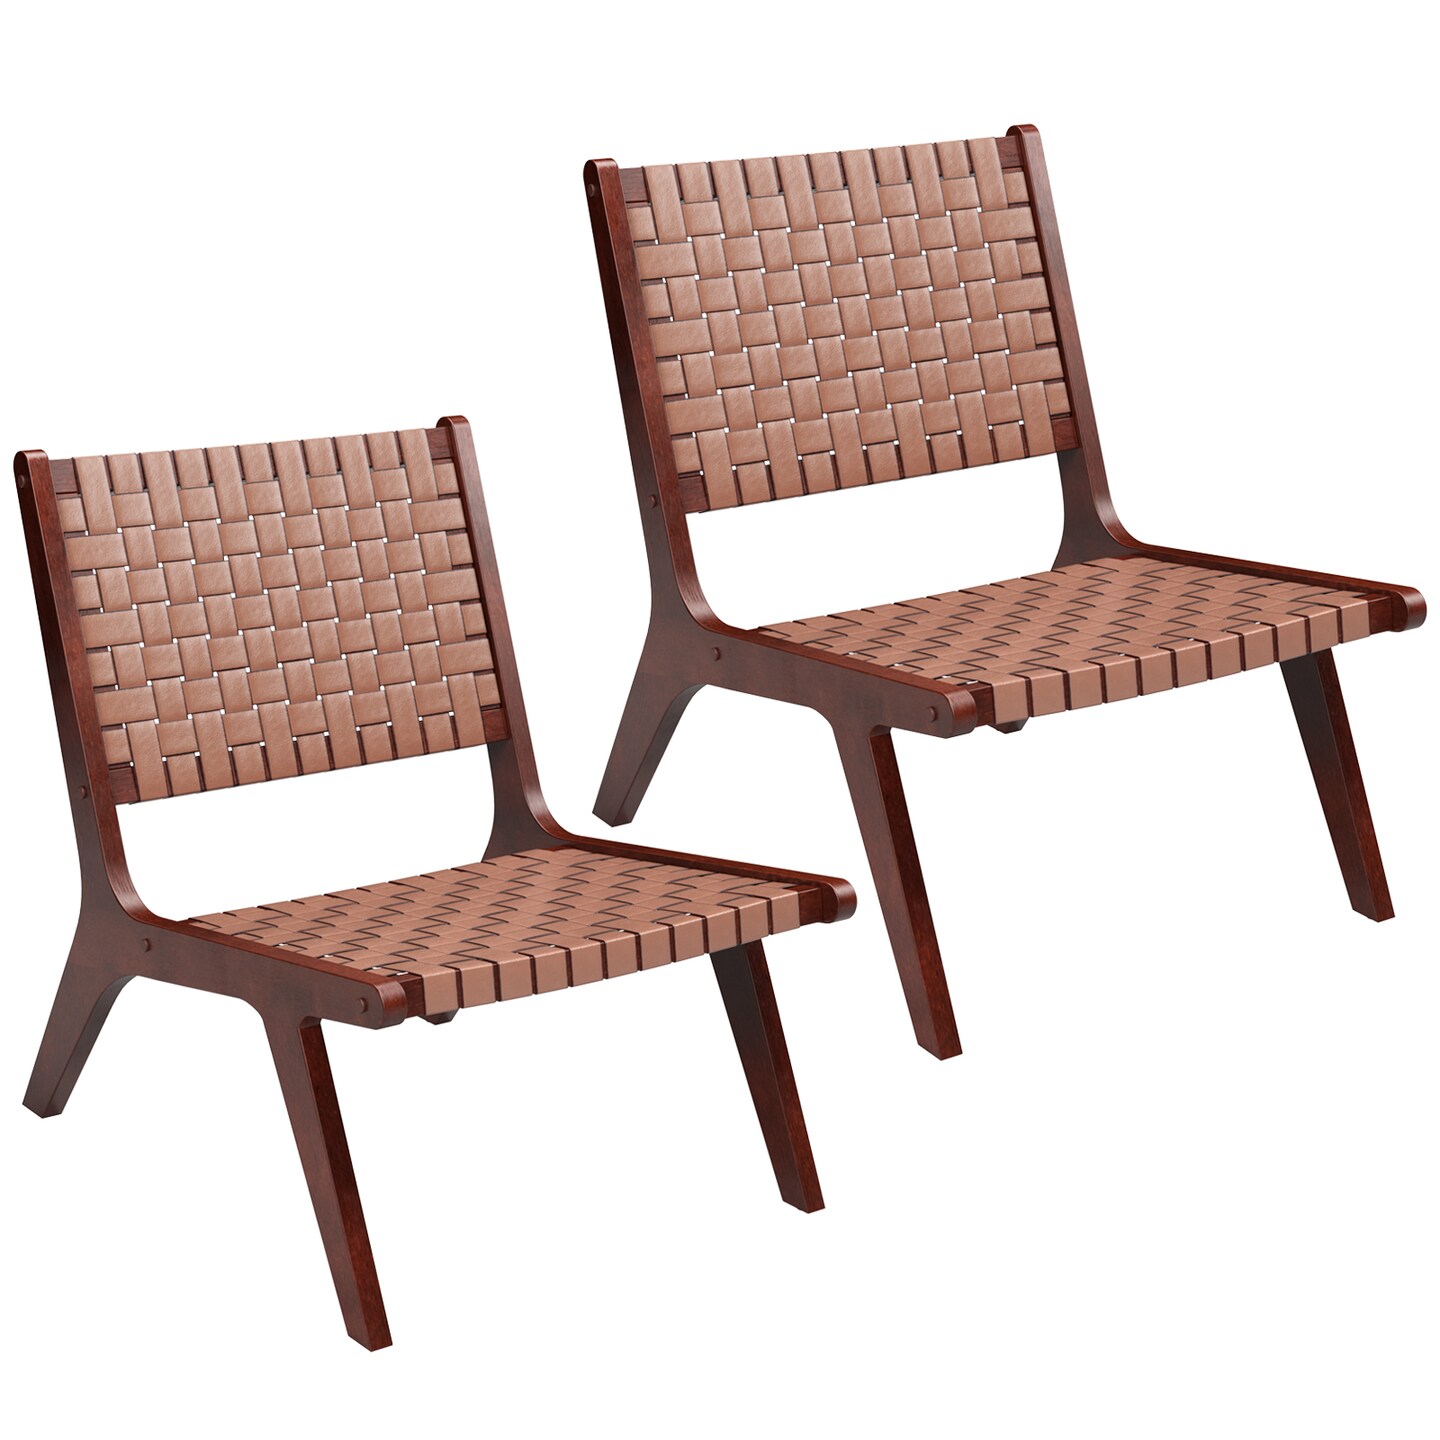 Woven Leather Accent Chairs With Wood Frame-set Of 2